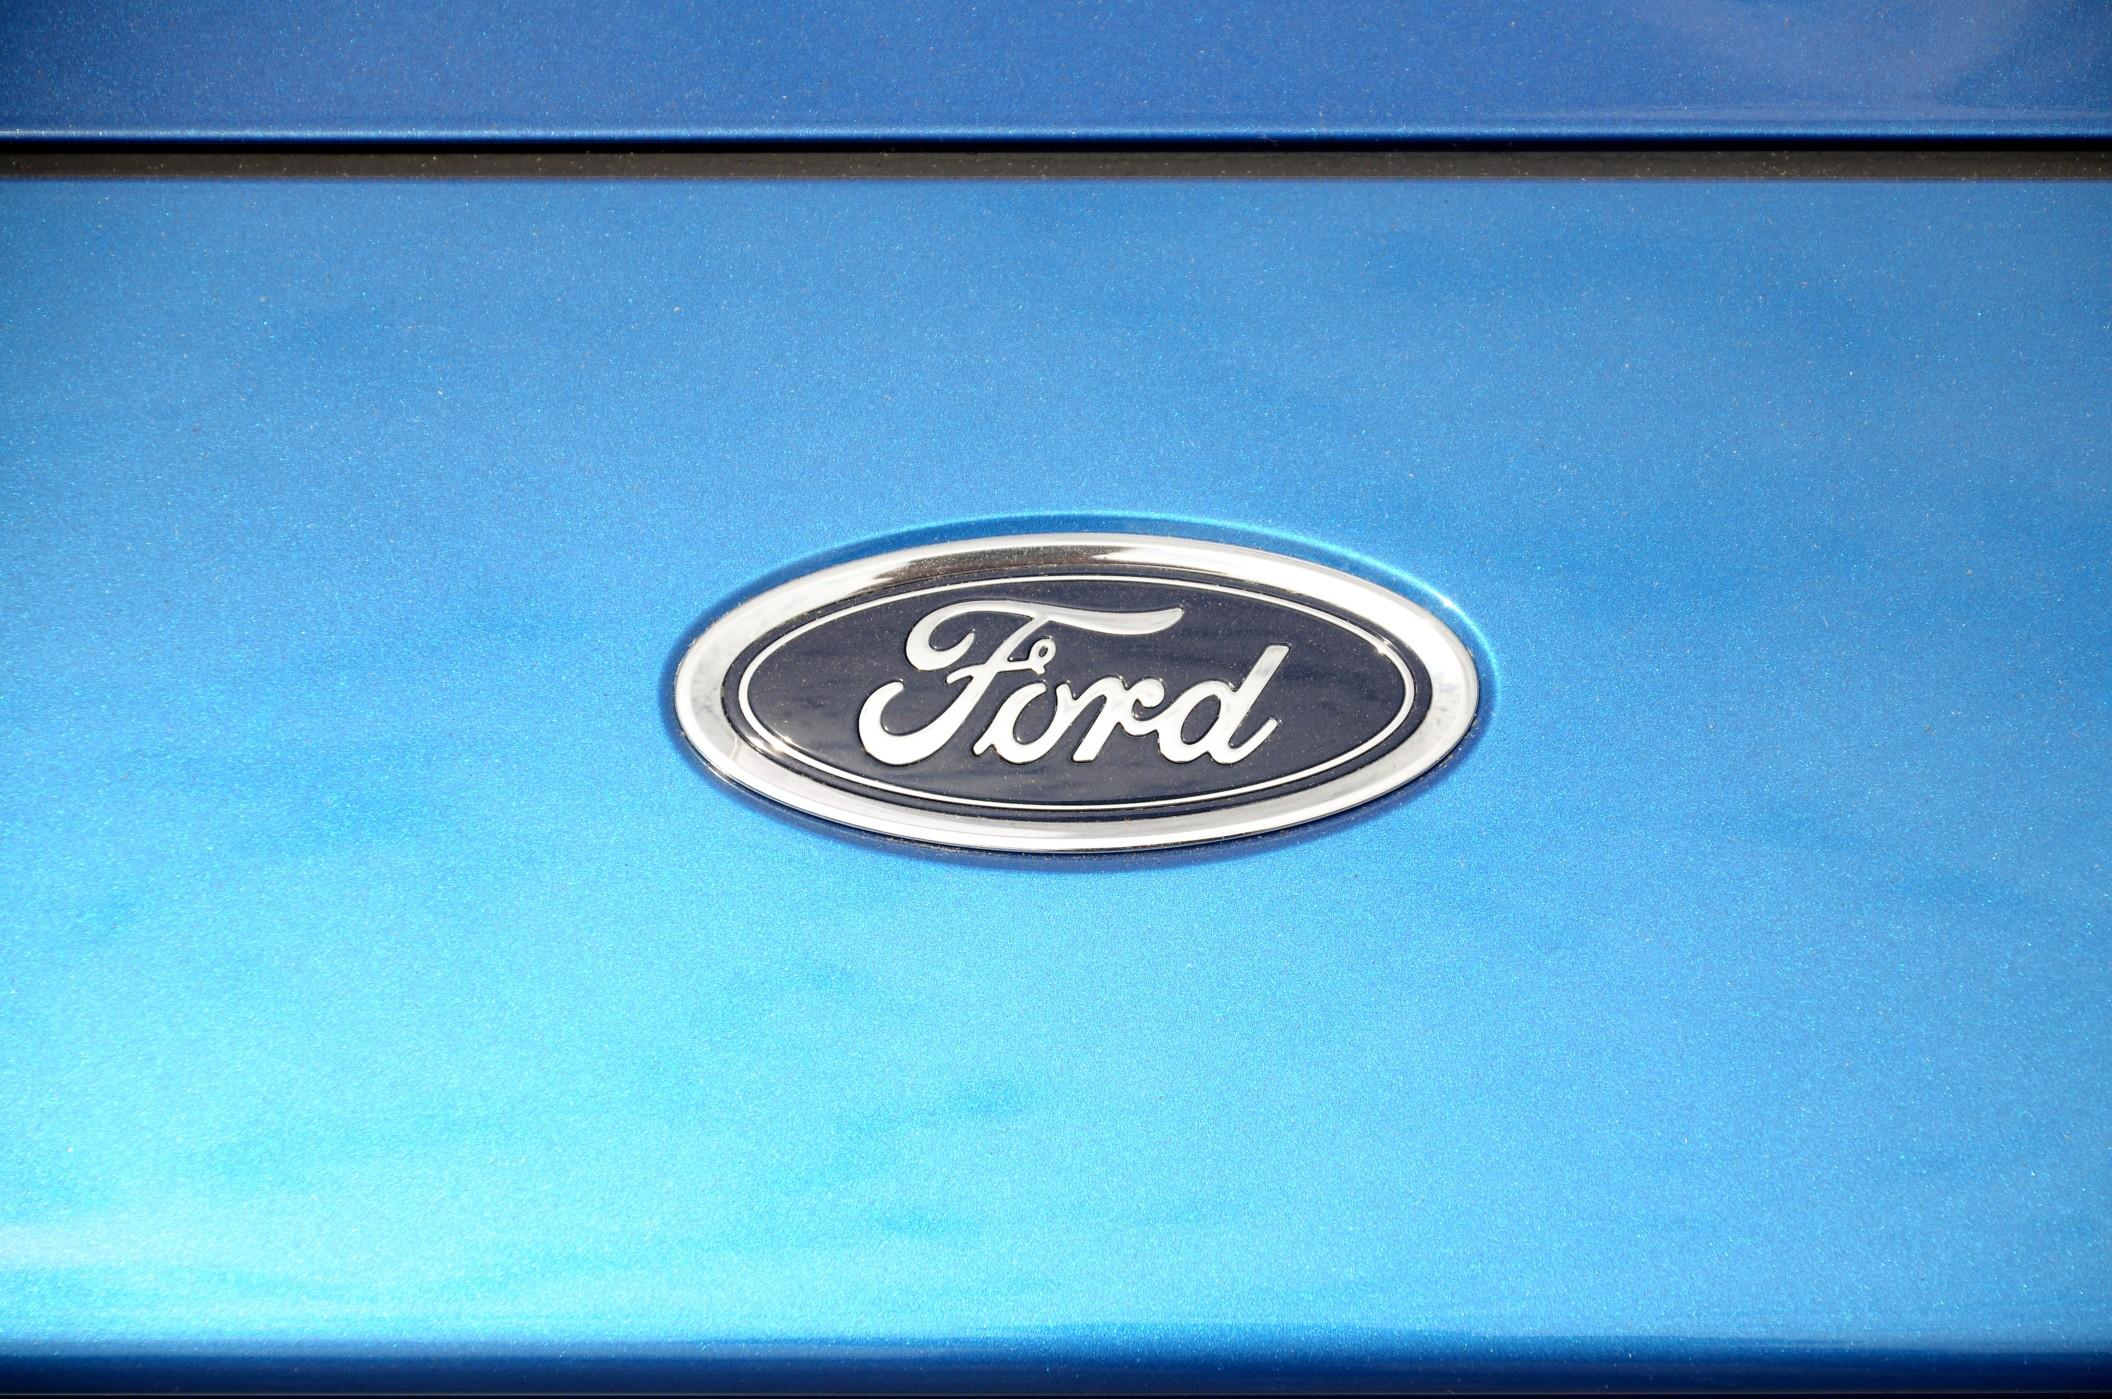 Those who don't like Ford use the acronym "Fix Or Repair Daily" to describe the company. But is that really fair?